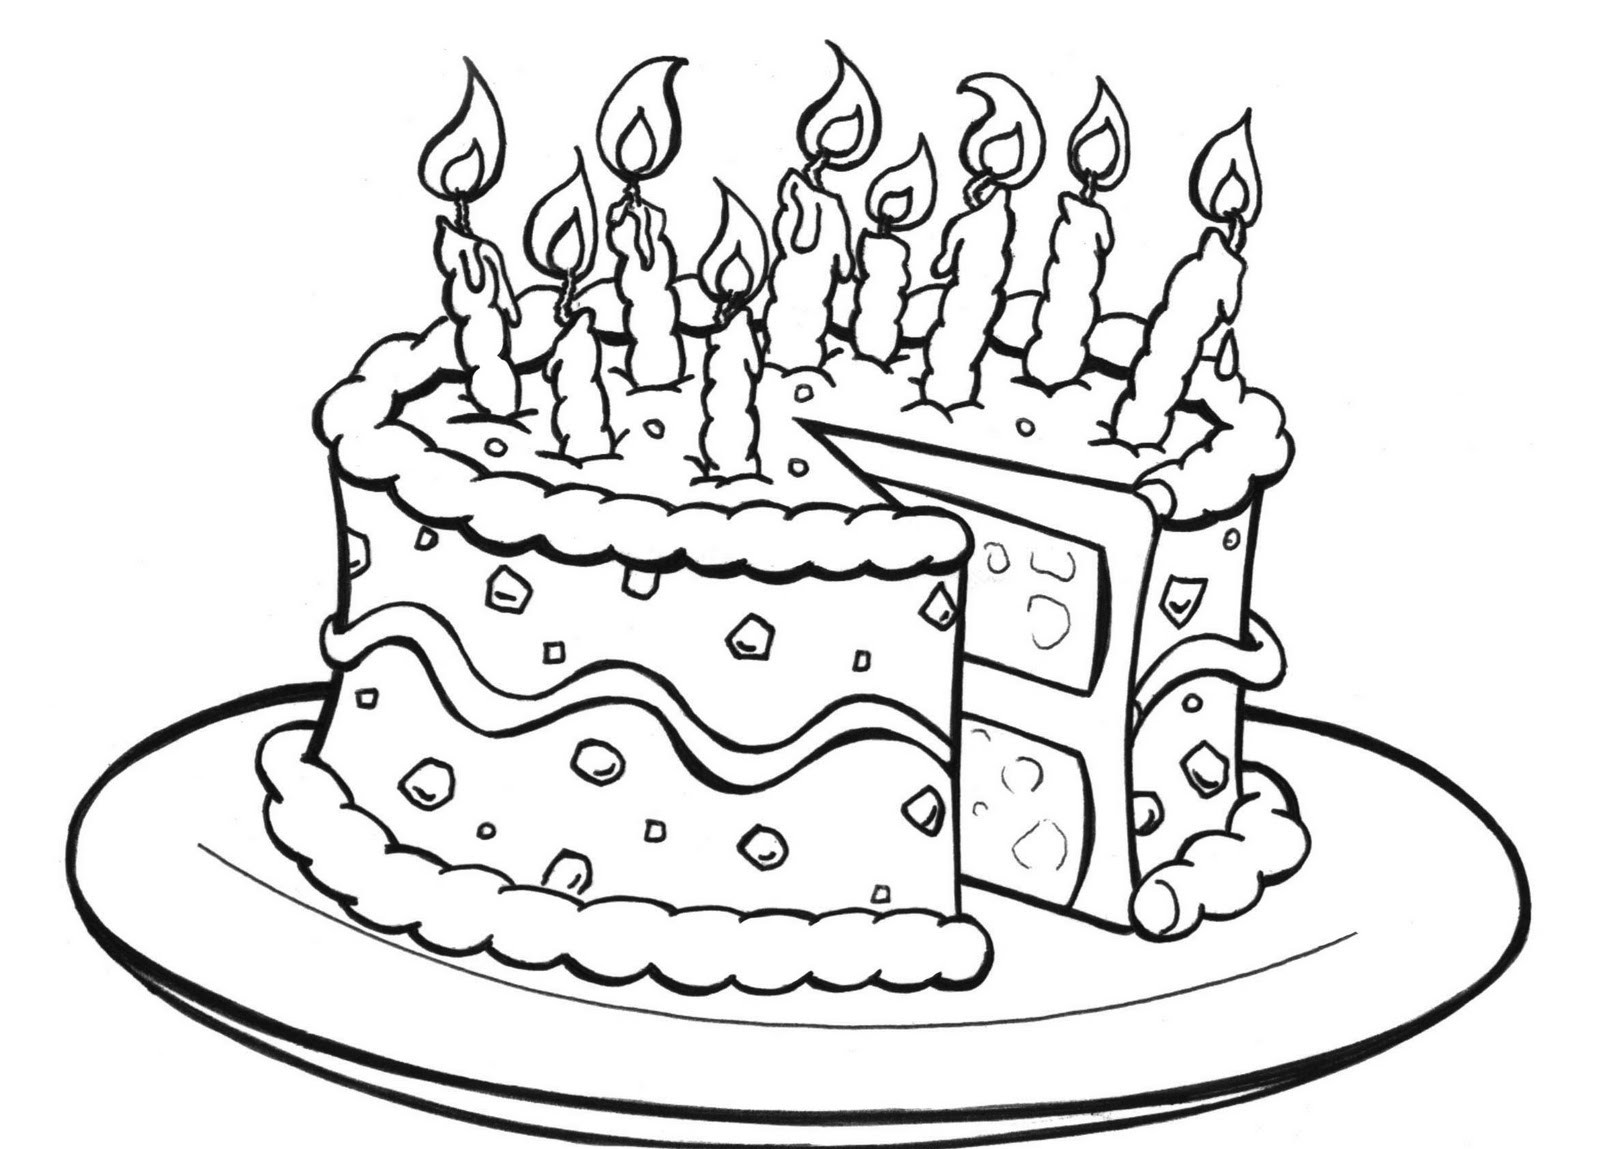 Cake Coloring Pages - GetColoringPages.com